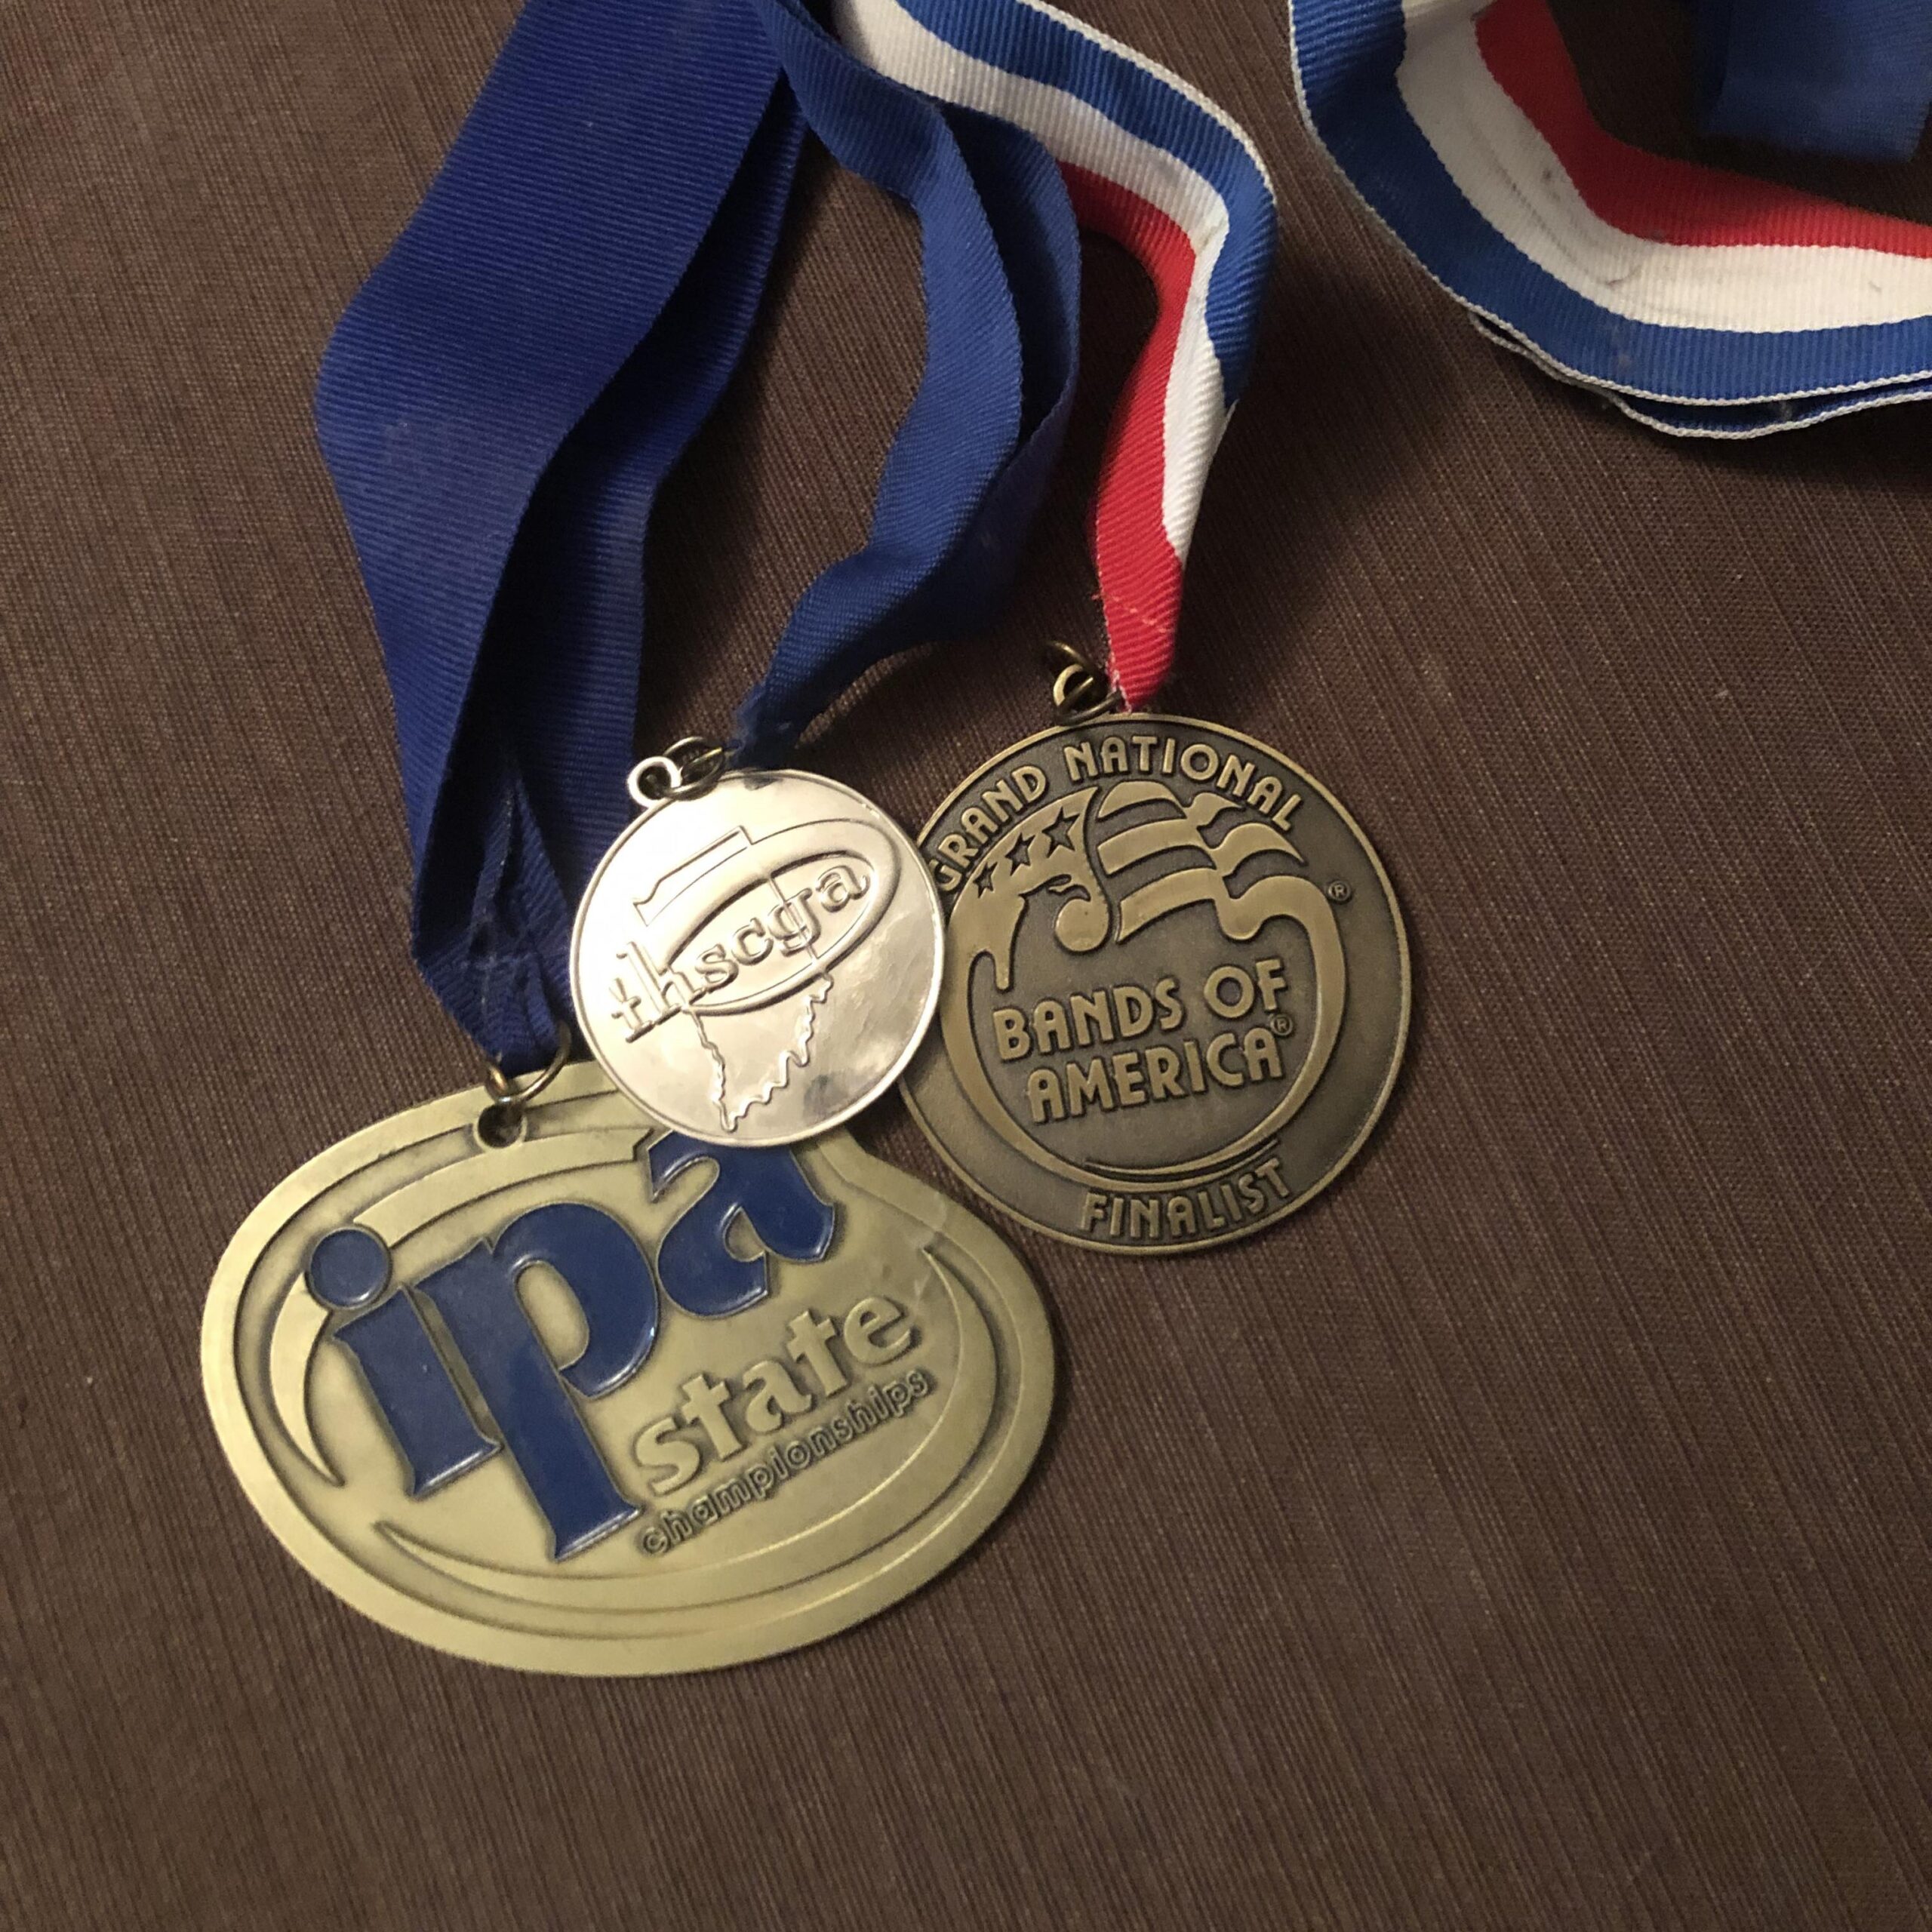 Three different marching band medals on blue or red, white, and blue ribbon against a solid wood background